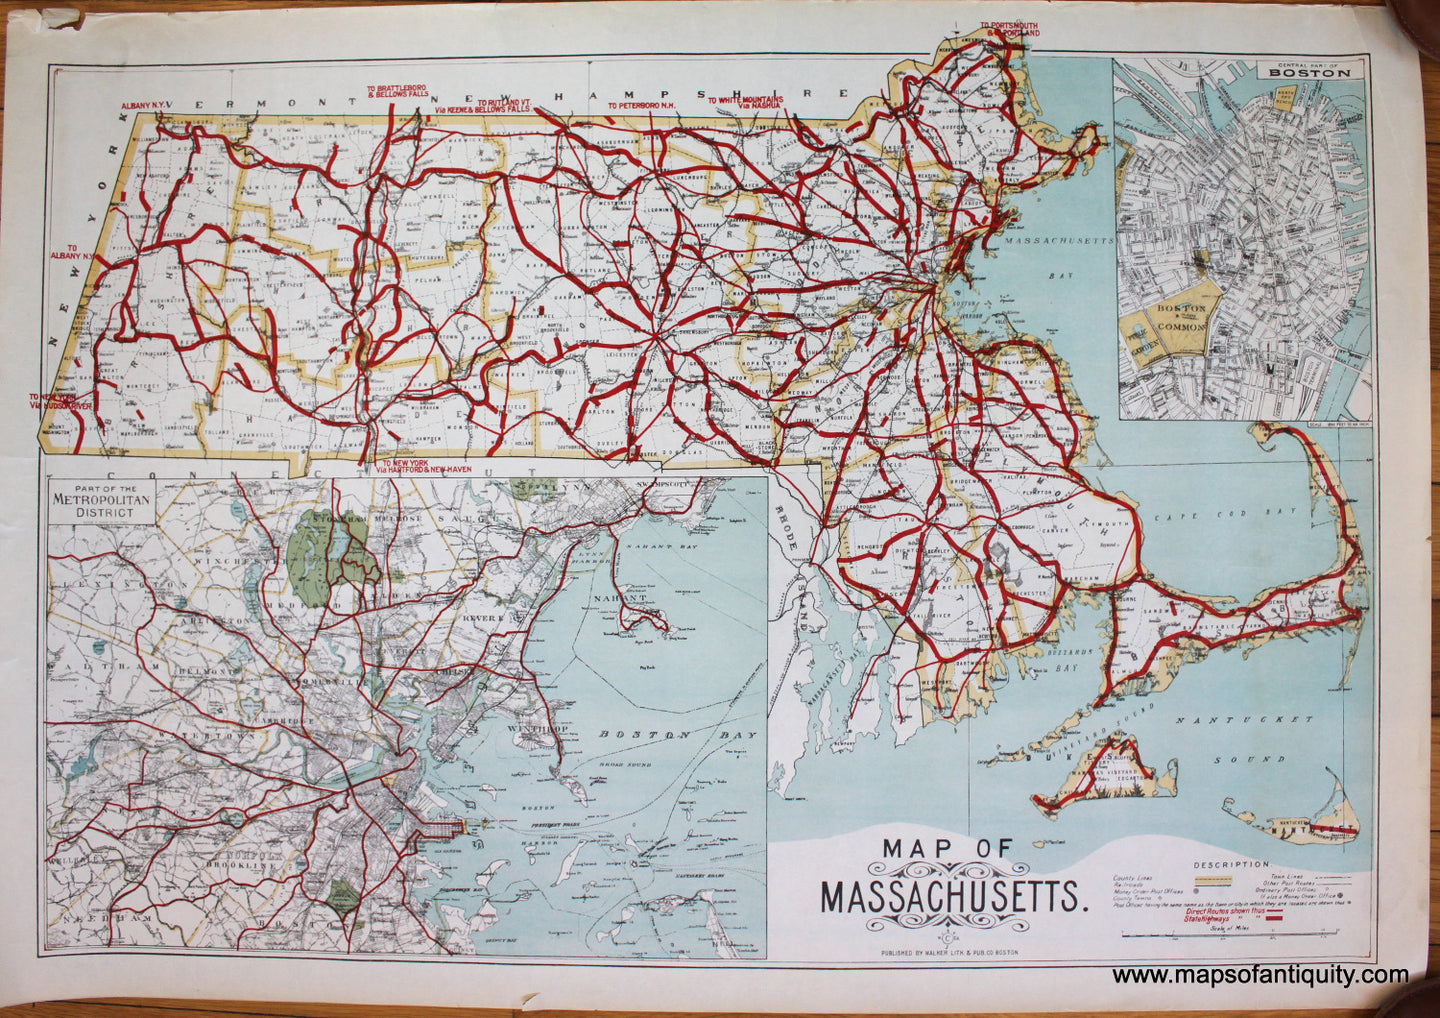 Antique-Printed-Color-Map-Map-of-Massachusetts-United-States-Massachusetts-c.-1920s-Walker-Maps-Of-Antiquity